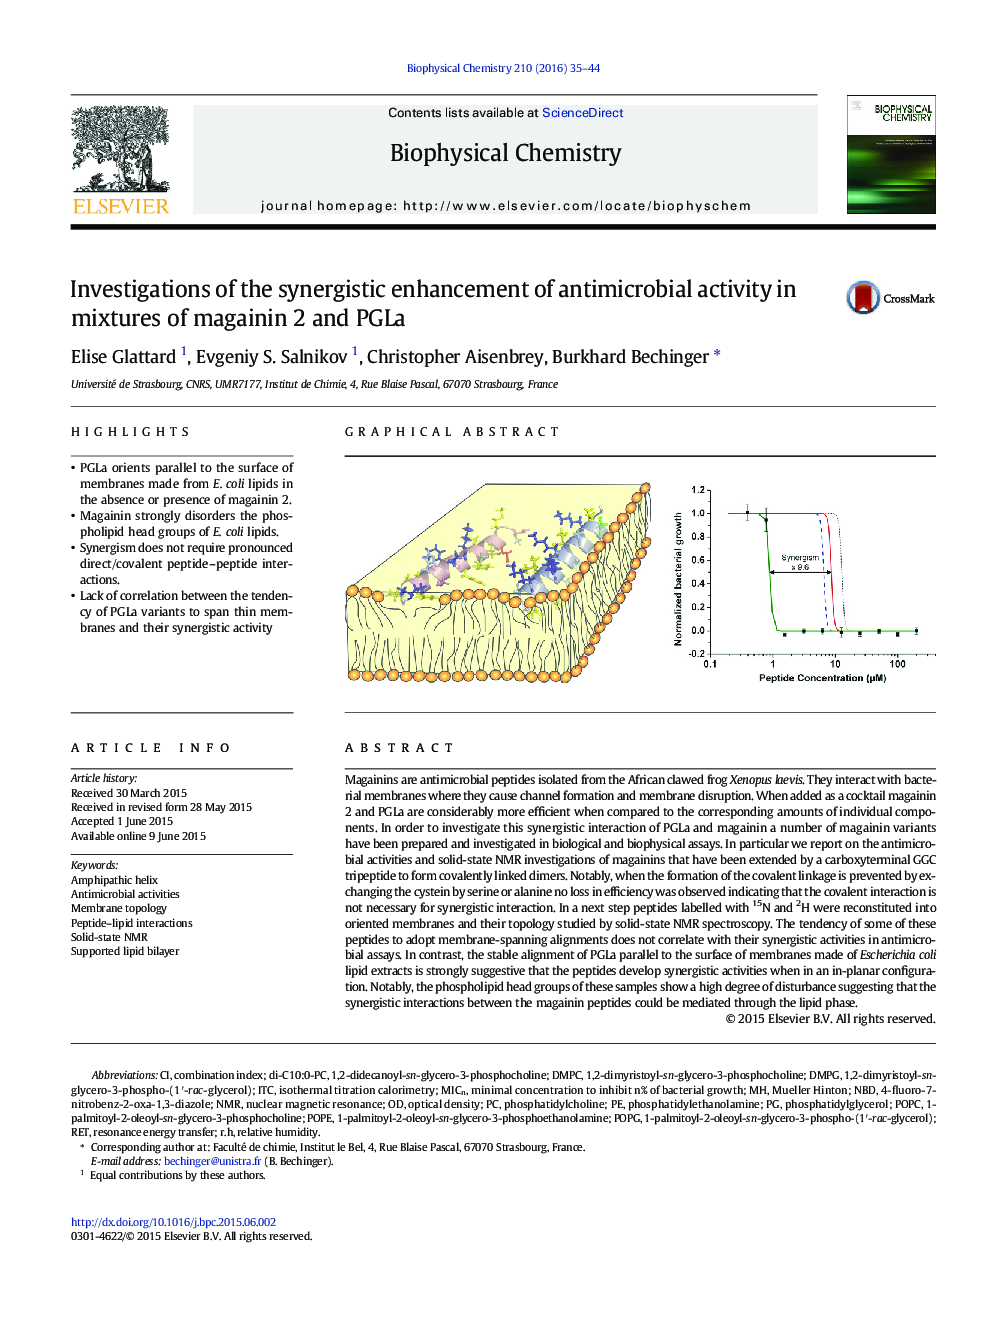 Investigations of the synergistic enhancement of antimicrobial activity in mixtures of magainin 2 and PGLa